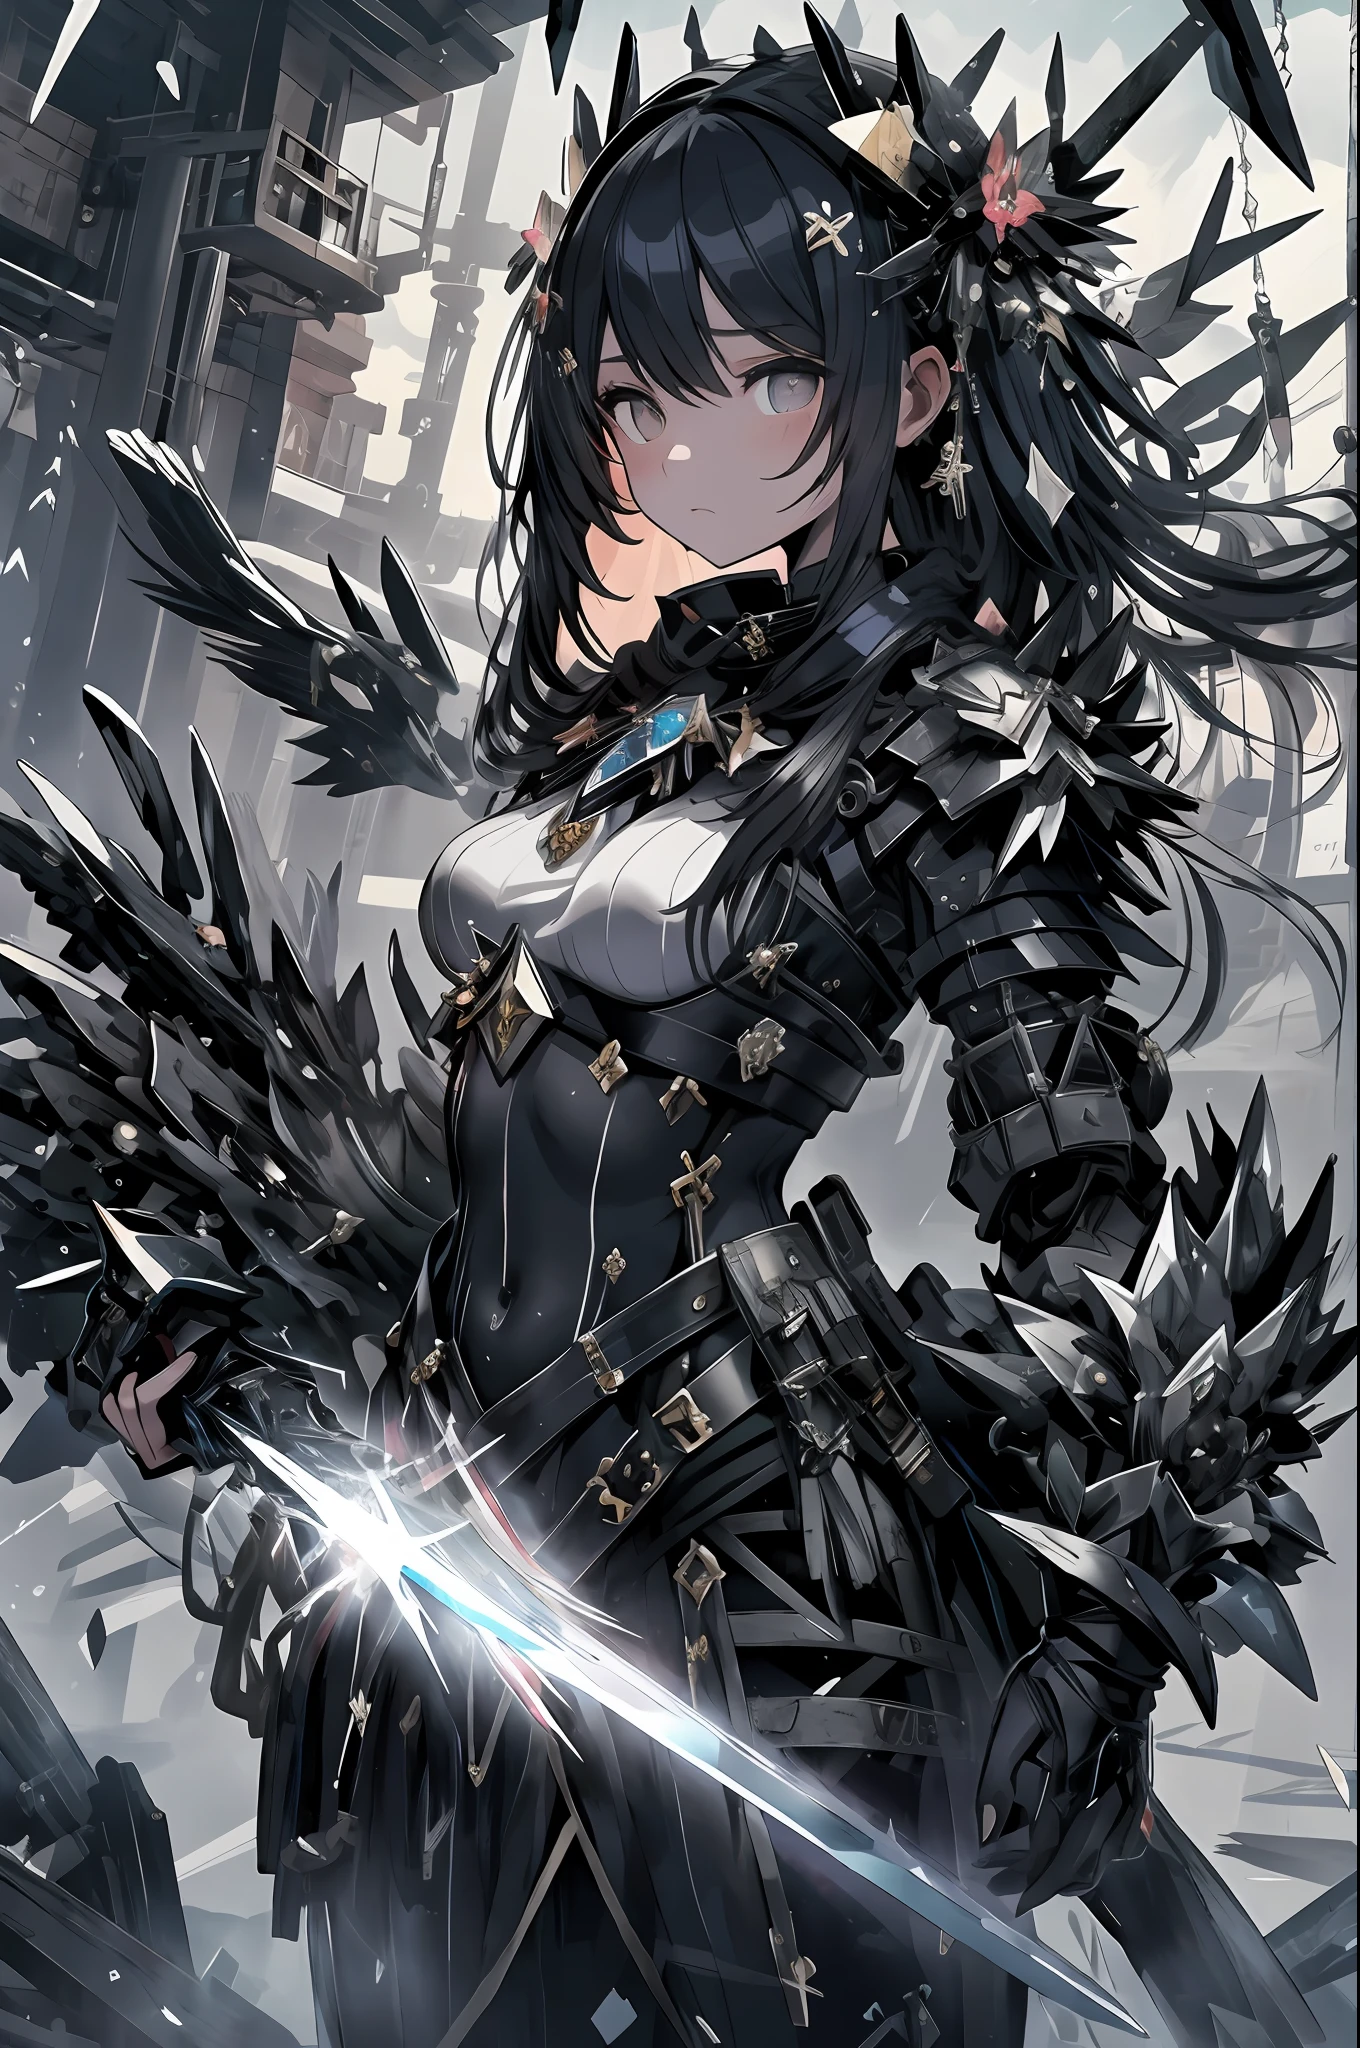 ​masterpiece, top-quality, hightquality, abyssal, awardwinning photo, depth of fields, nffsw, ighly detailed, trending on artstationh, Trending in CGSighbour, Convoluted, high detailing,This illustration is、It depicts a fantasy world with a solemn and gloomy atmosphere.。Woman in black armor、Stand with a very large sword in each hand。Her armor absorbs light、Glittering cold.、Her presence makes you powerful and dignified。Her expression was stern.、I'm determined.、Her eyes show determination and determination。

Powder々The glass that flew around it.、This symbolizes the battles and trials of the past。Shards of glass reflect light、Creating unstable beauty。Every time the wind blows、Powder々The creak of the glass that became、It reminds me of her past struggles and strengths。

This illustration is、Through the will of steel and the figure of a female warrior who overcame the hardships of the past、It conveys a message of courage and hope.。